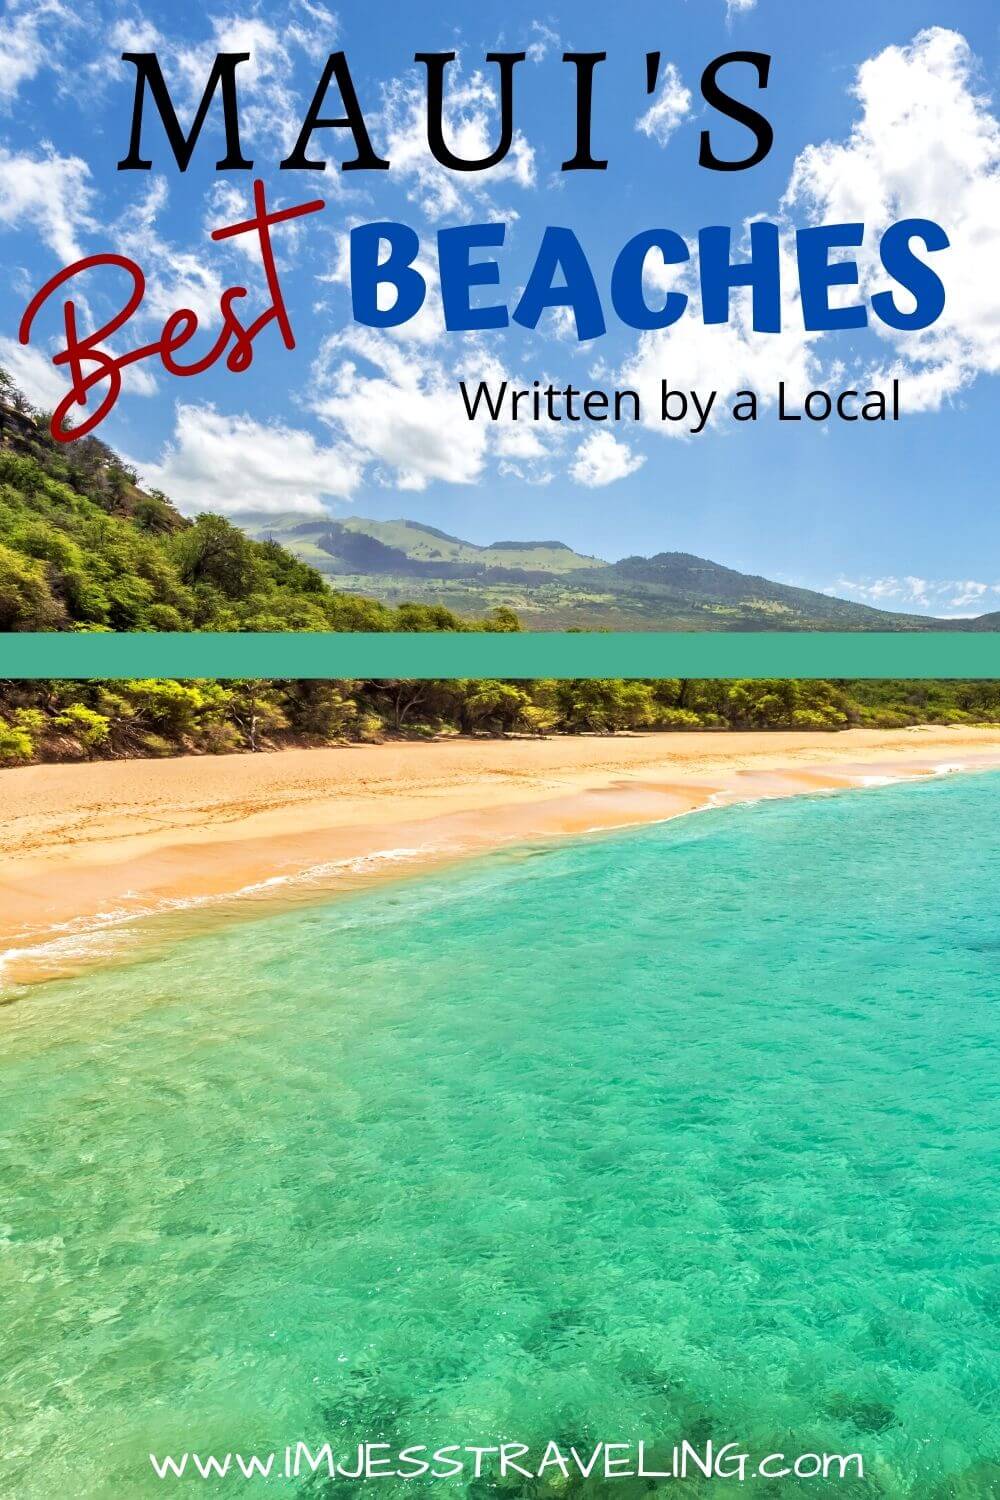 The Best Beaches in Maui: Written by a Local